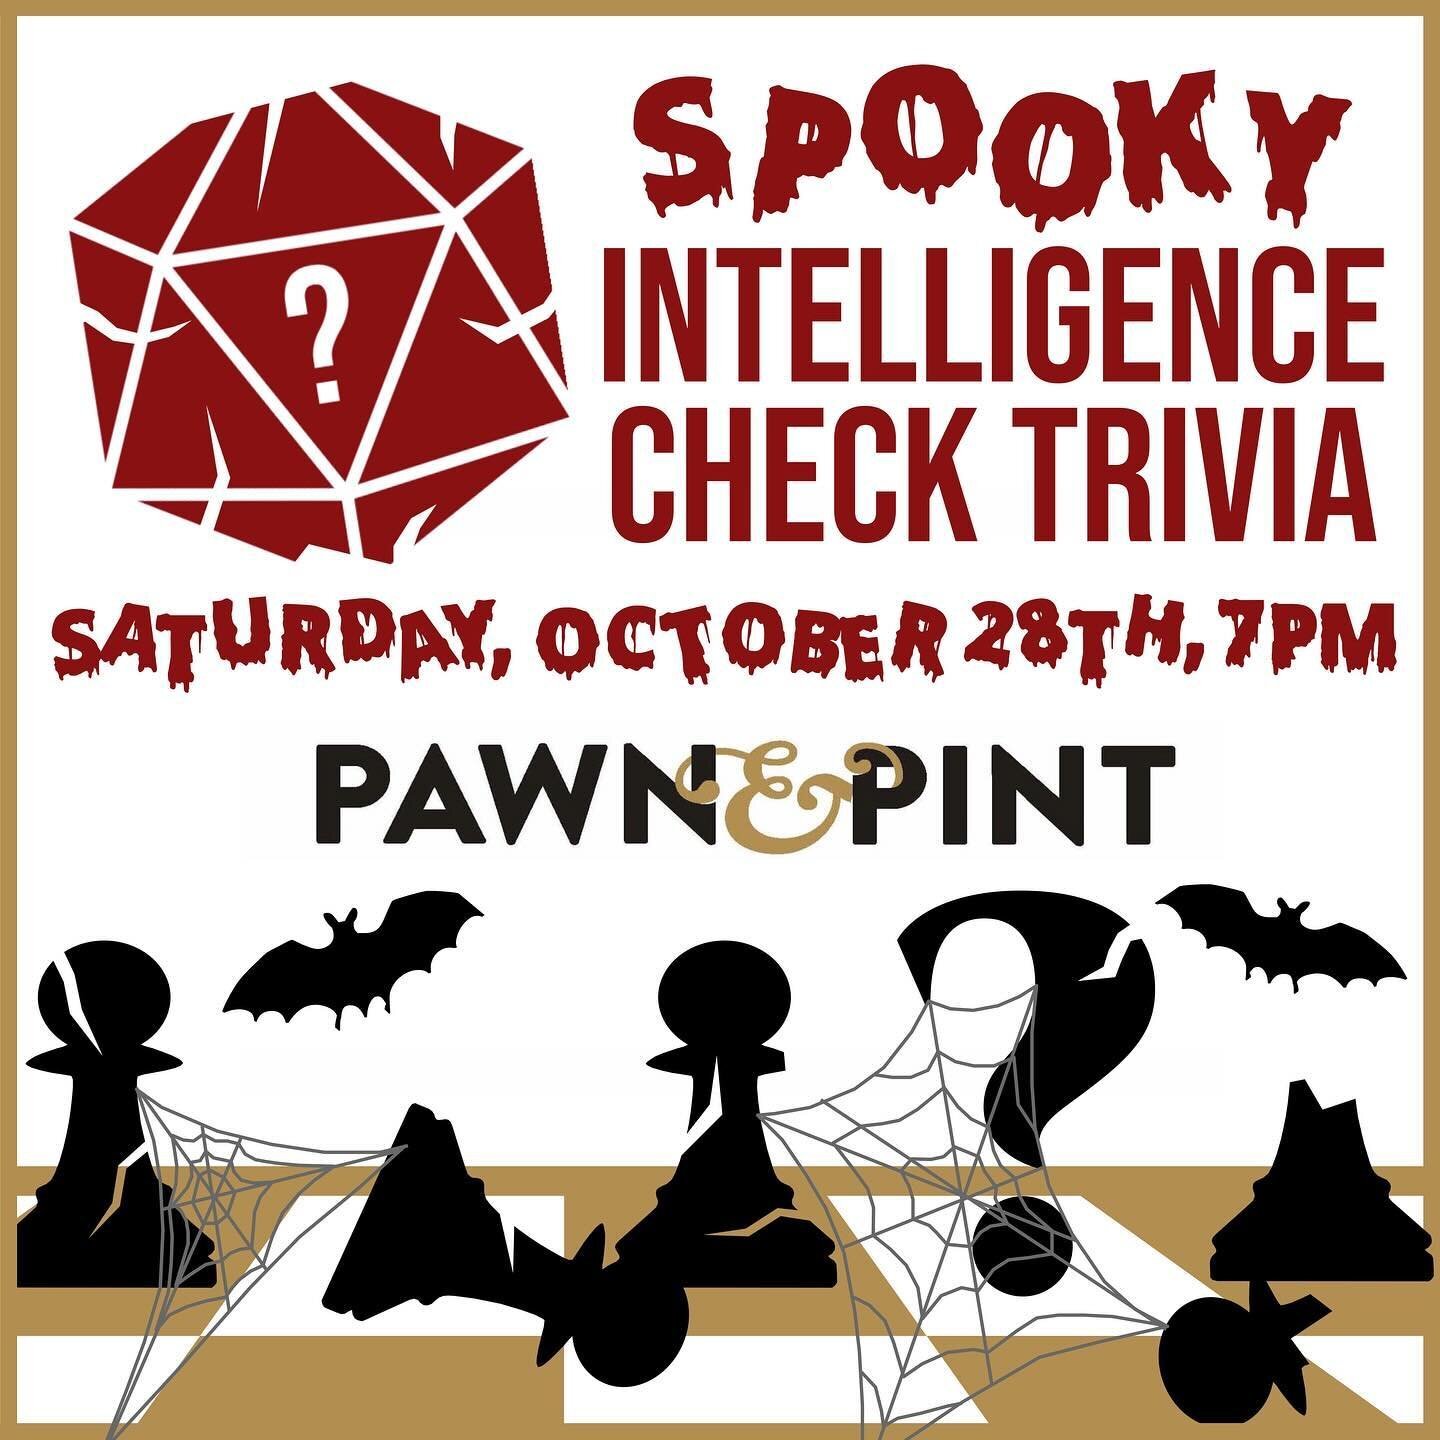 Join us this Saturday at @pawnandpint for SPOOKY Intelligence Check Trivia at their annual Halloween party! $30 bottomless wells and drafts from 7-Midnight! Be sure to show up in your creepiest costumes ready for a ghoulishly good time!